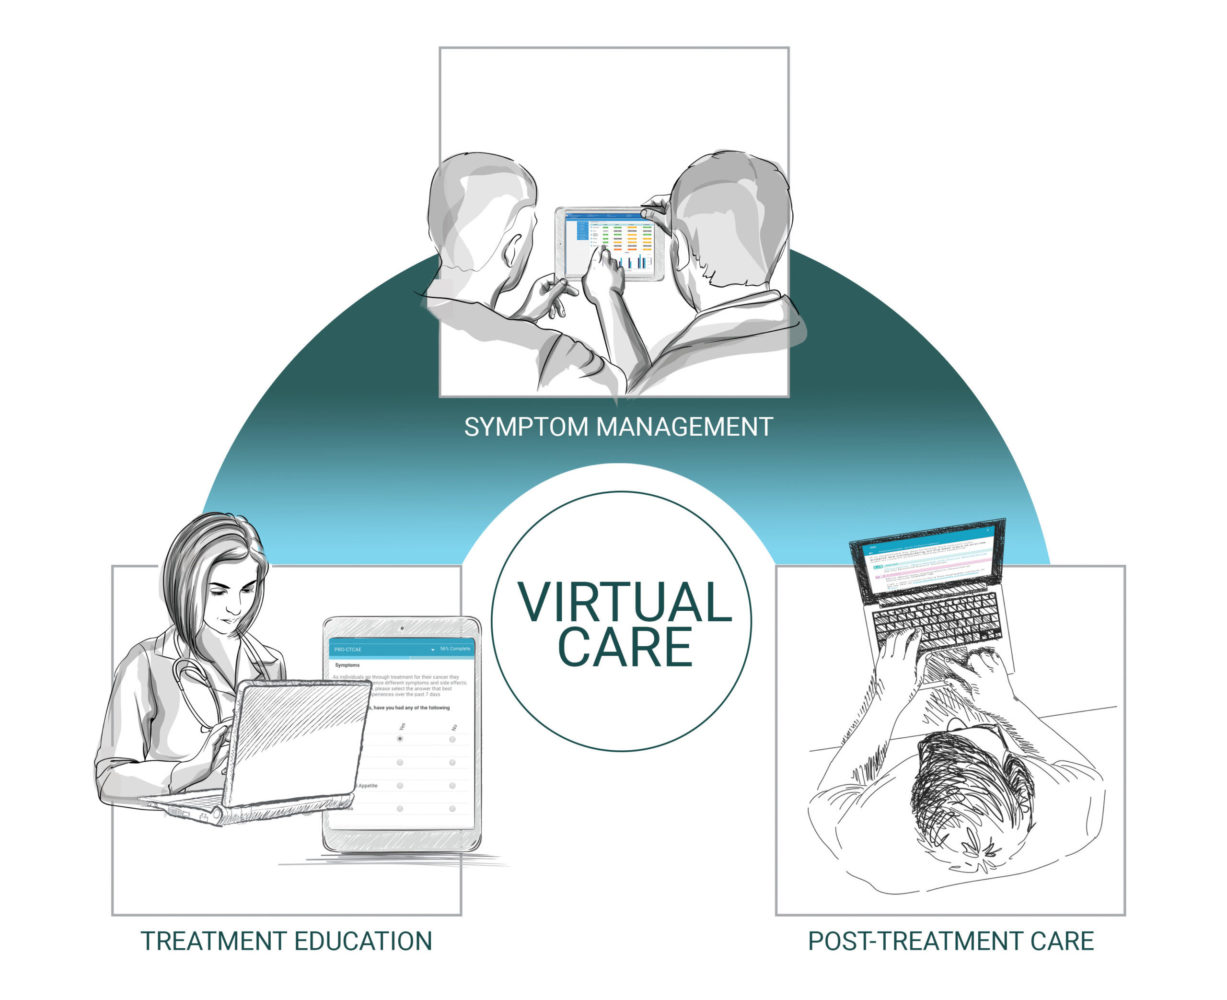 ePROs: A PROactive Approach to Virtual Care